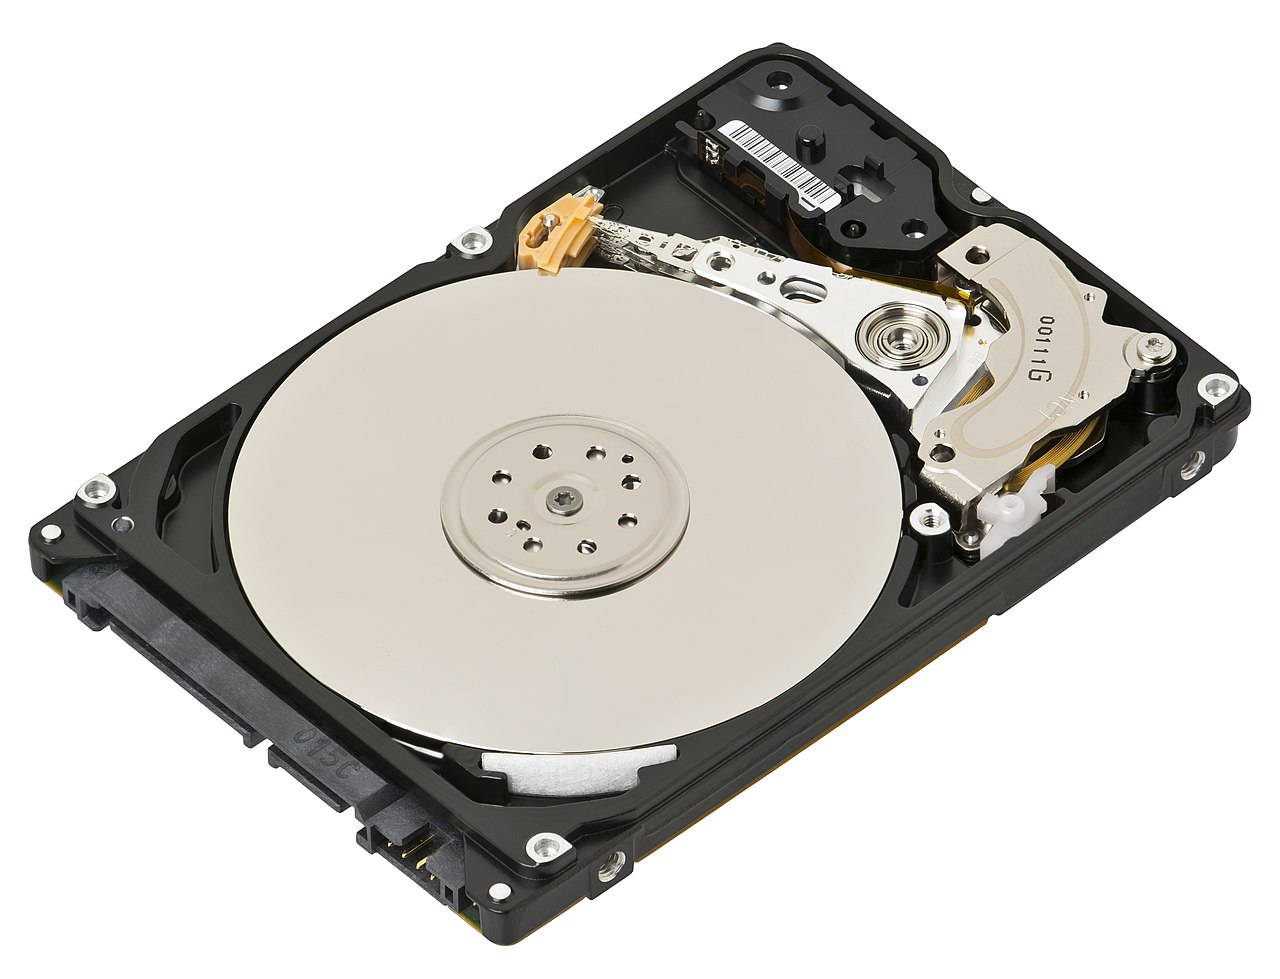 A computer with a full hard drive.